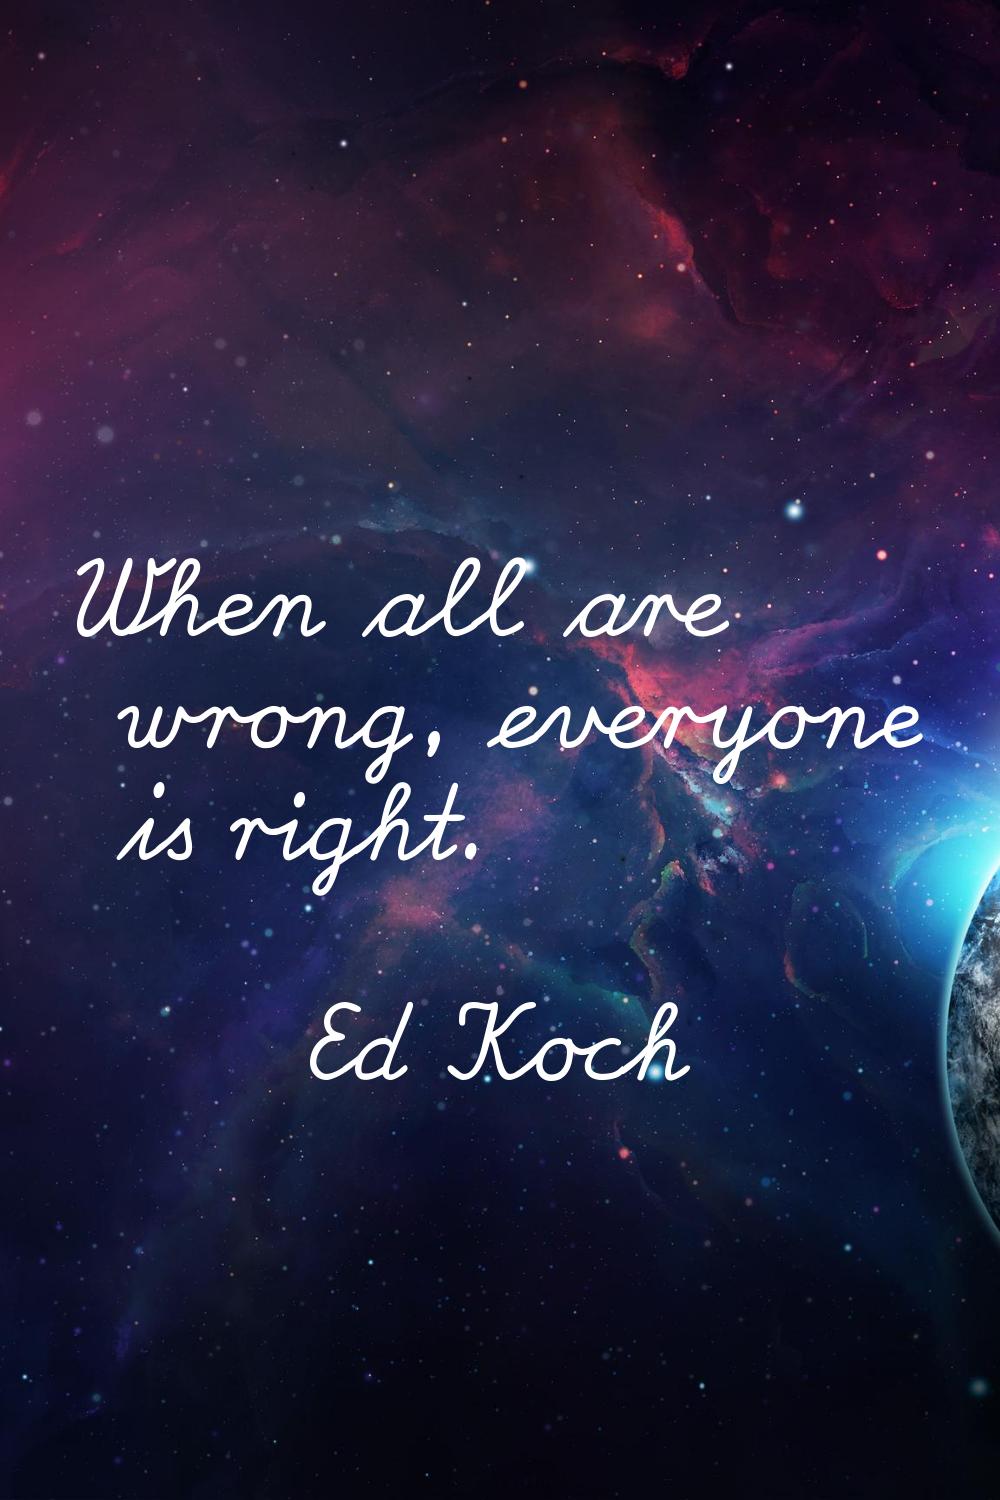 When all are wrong, everyone is right.